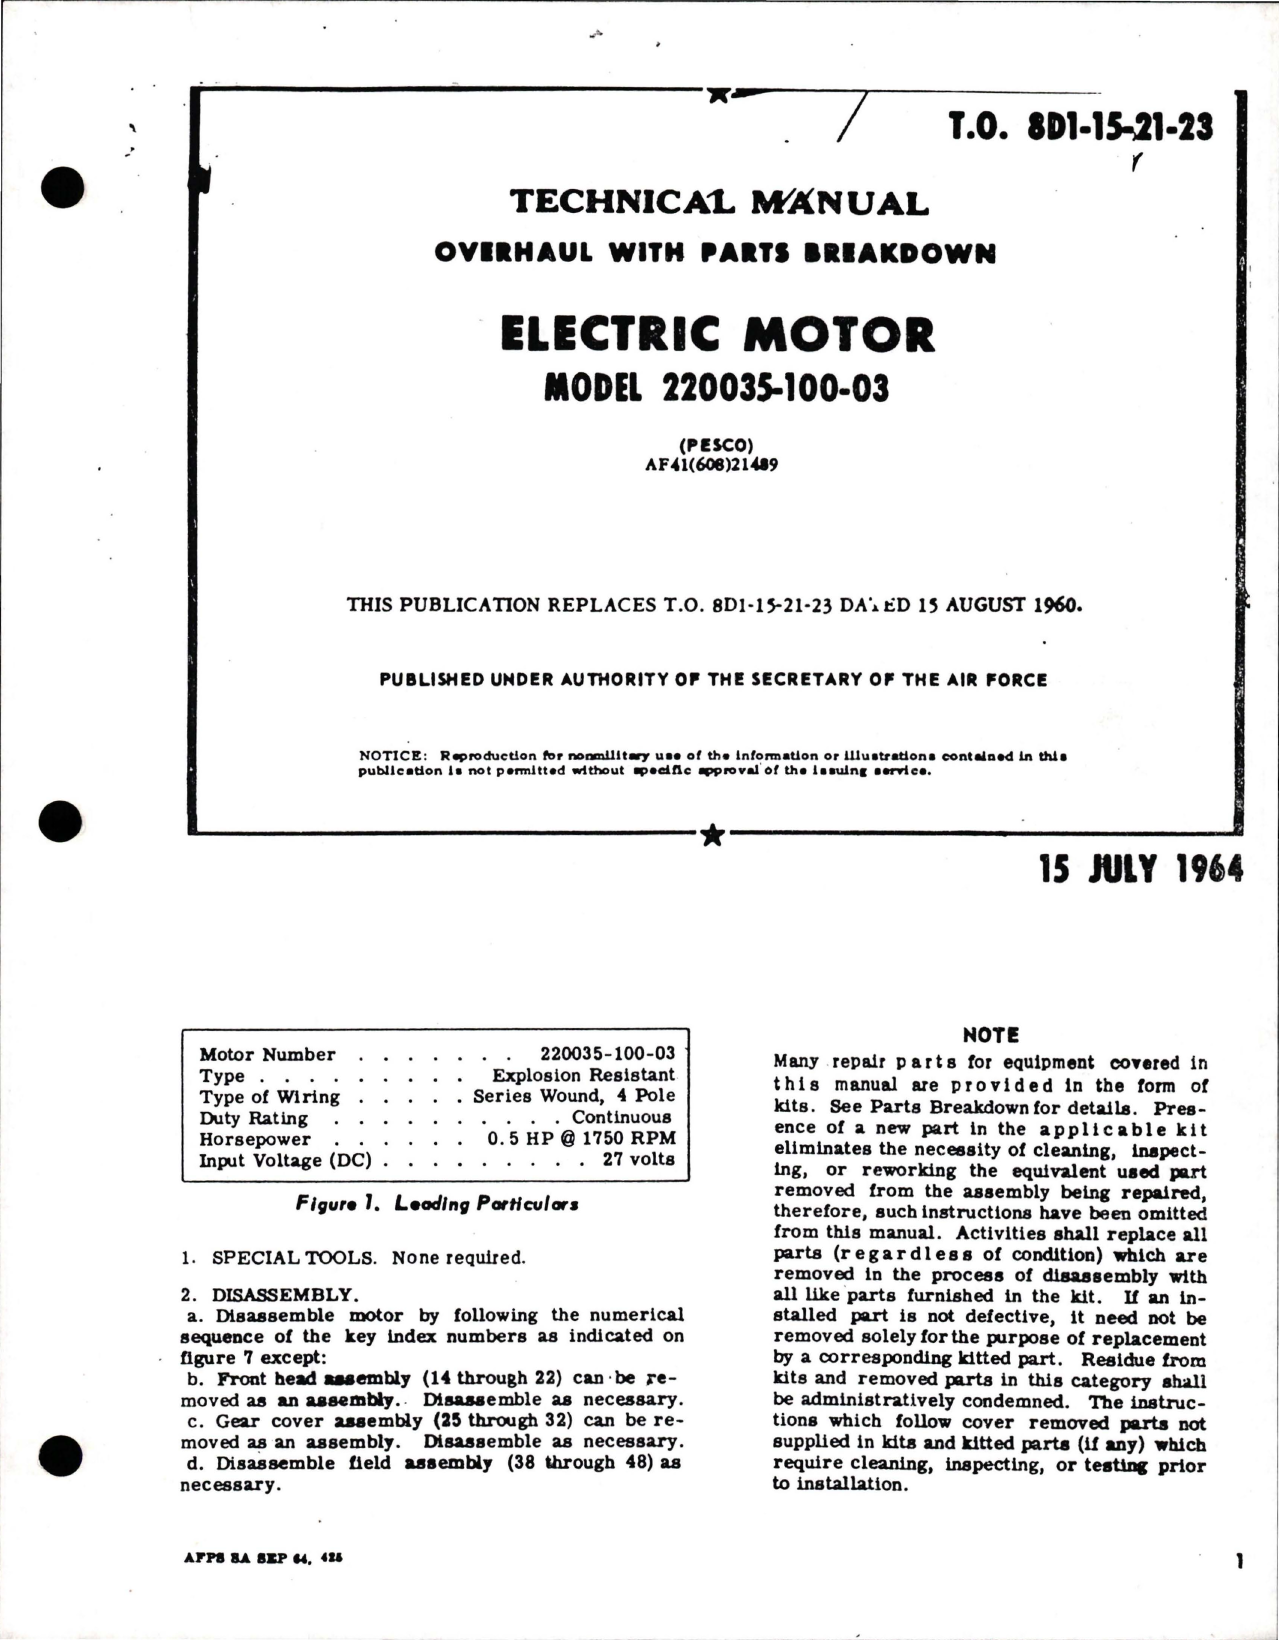 Sample page 1 from AirCorps Library document: Overhaul with Parts Breakdown for Electric Motor - Model 220035-100-03